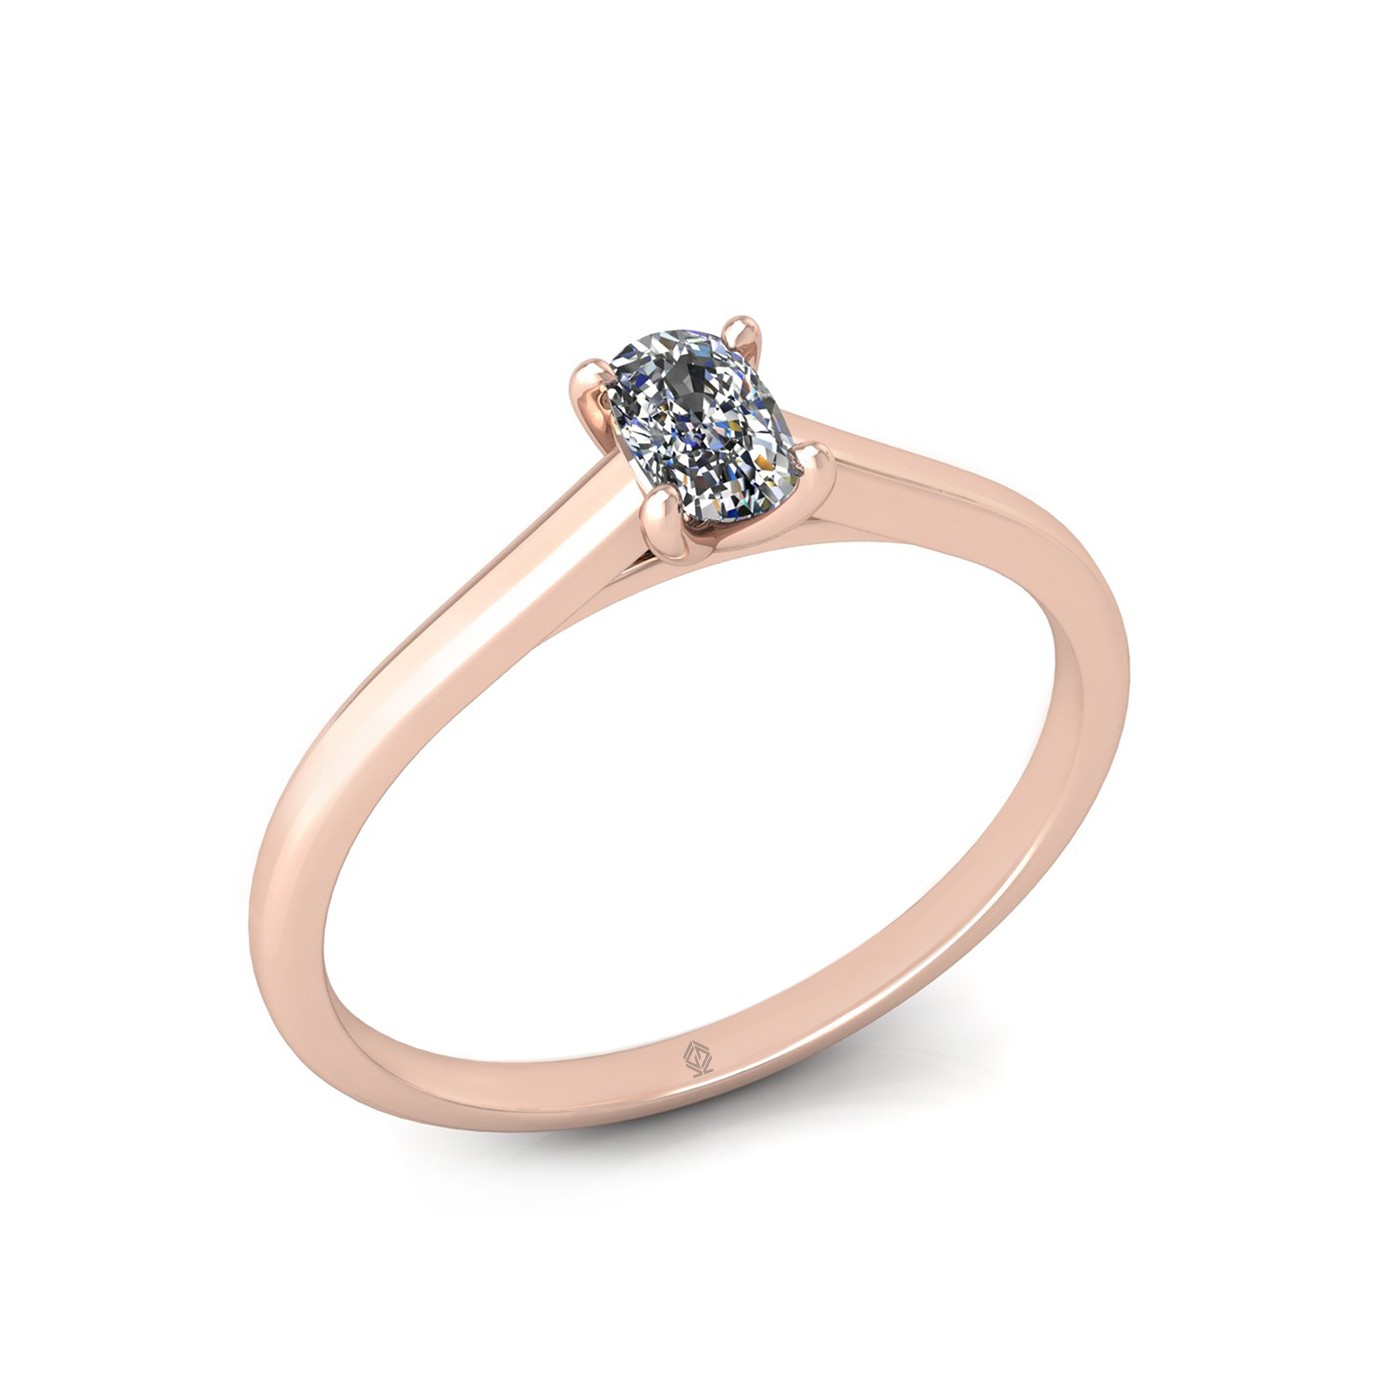 18k rose gold  0,30 ct 4 prongs solitaire elongated cushion cut diamond engagement ring with whisper thin band Photos & images